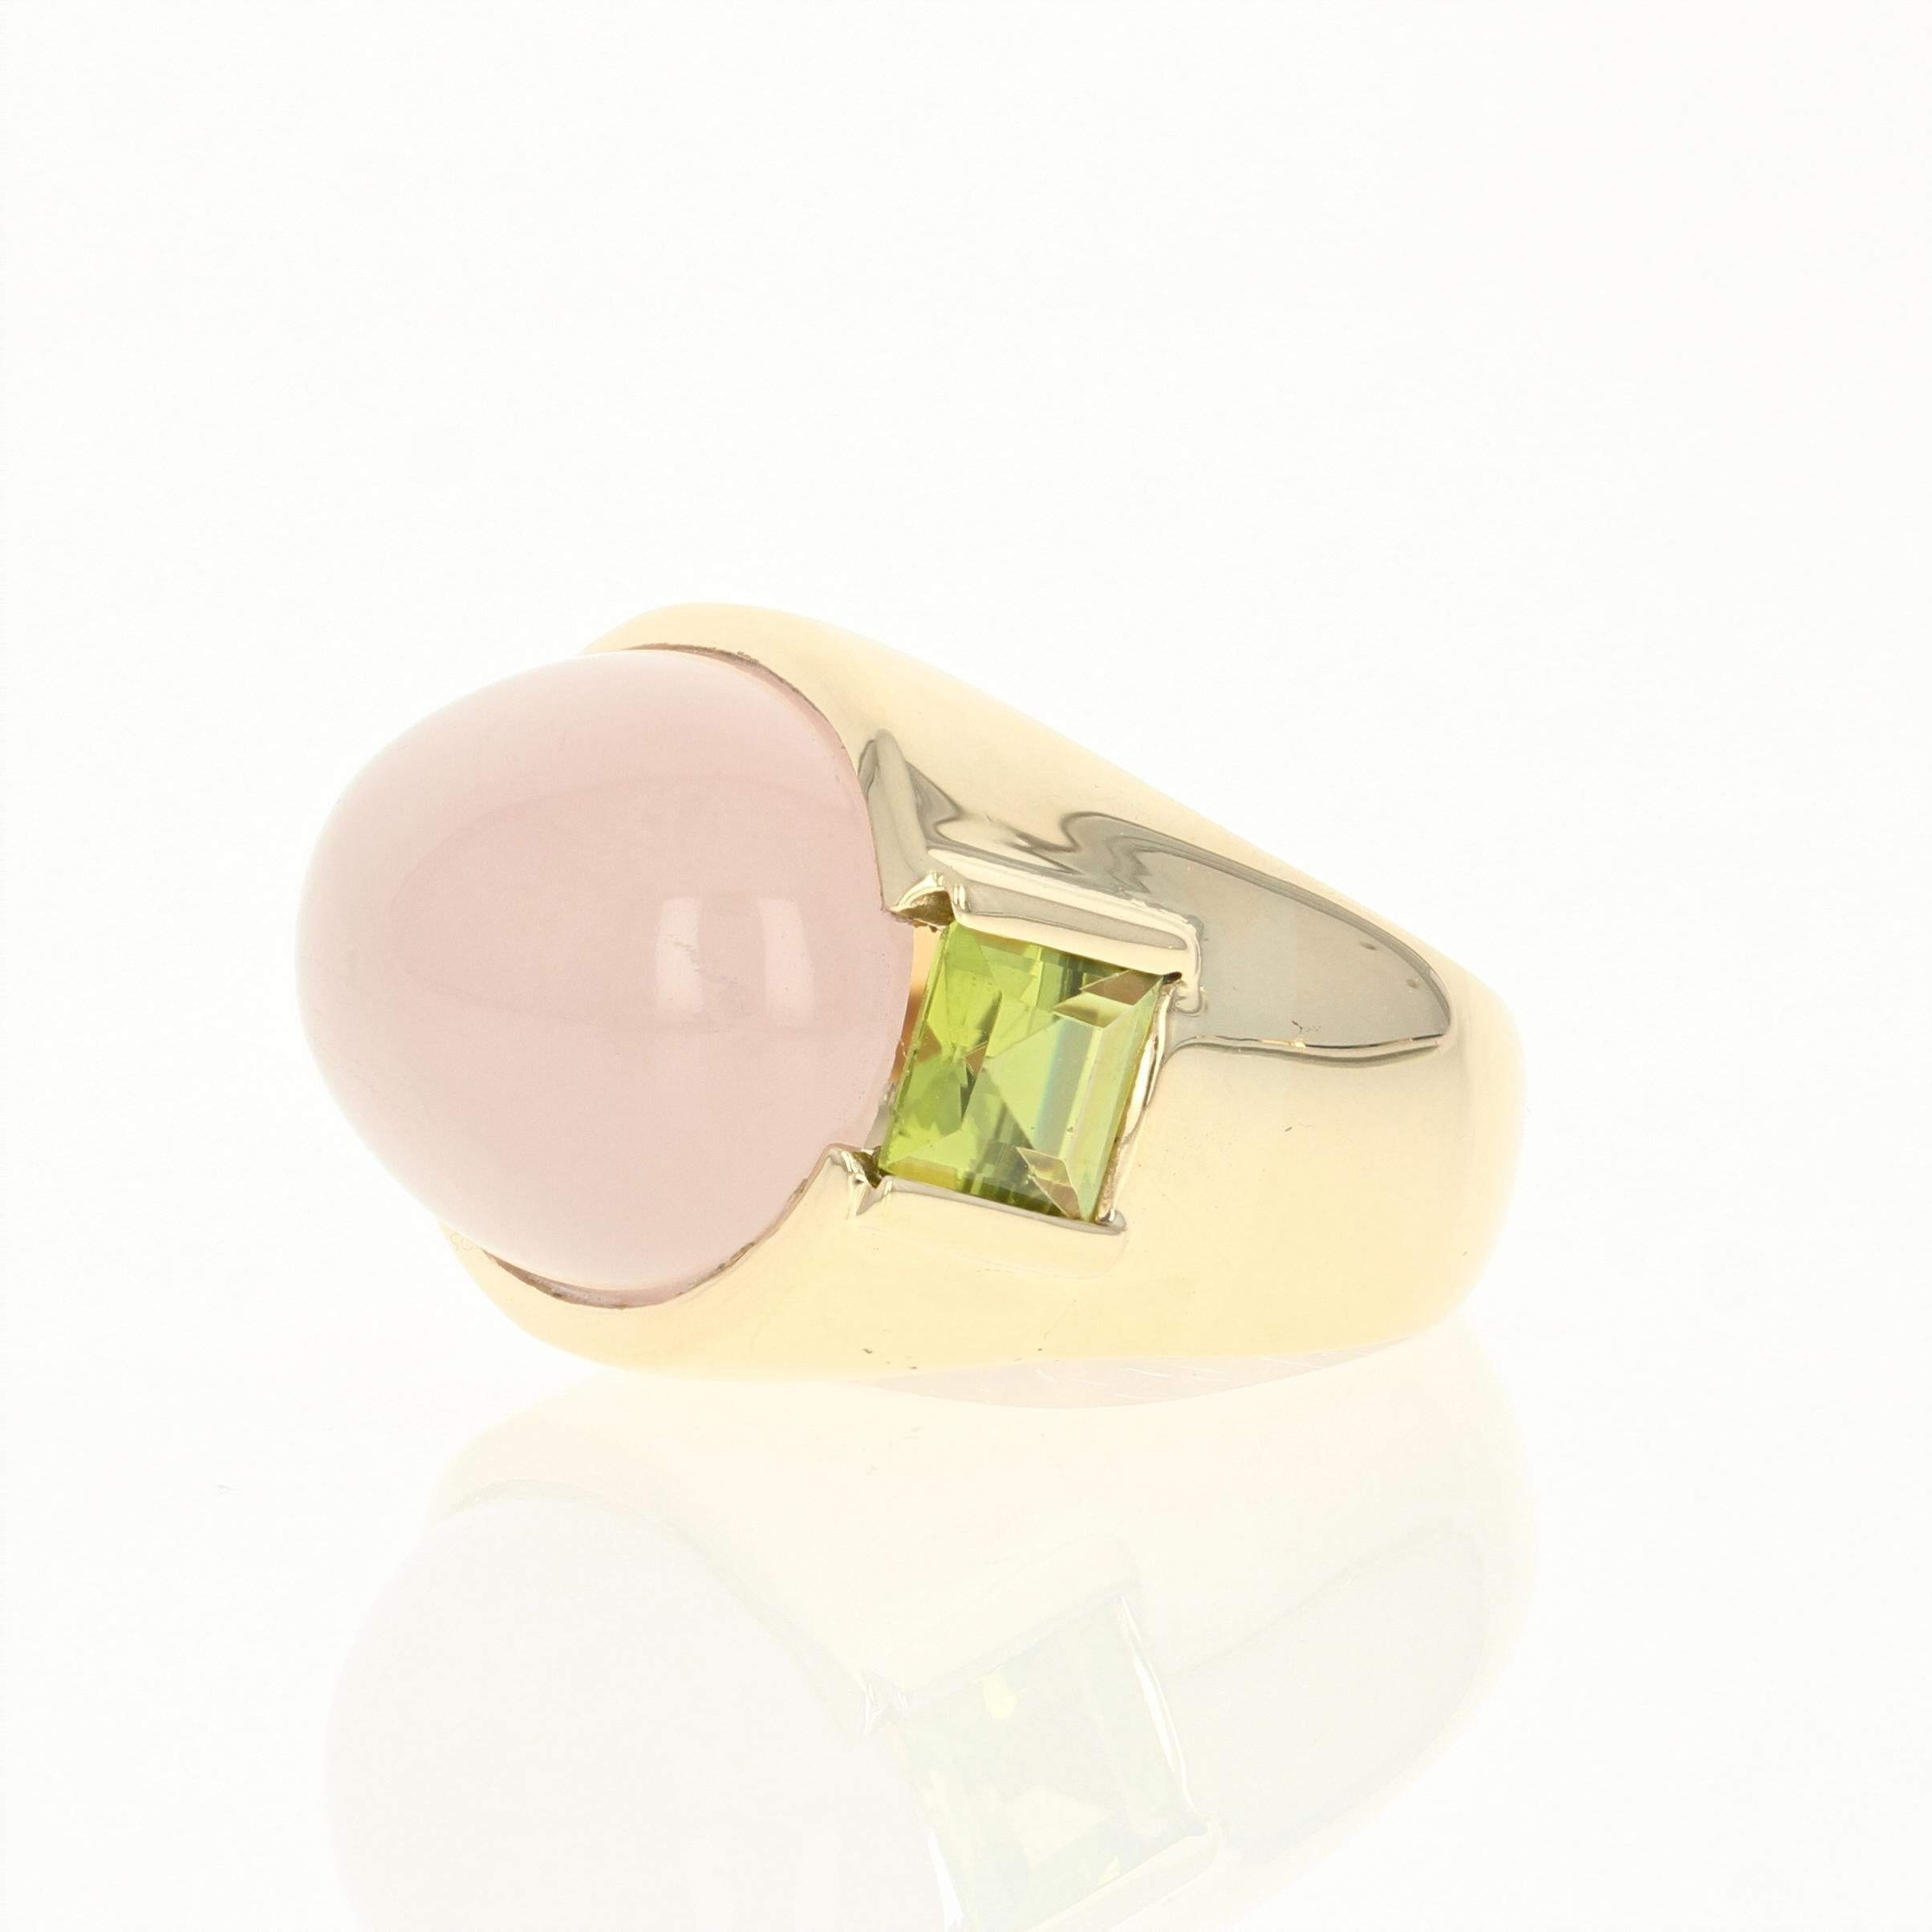 Define your cosmopolitan style with this artistically chic piece! Crafted in luxurious 18k yellow gold and having a sculptural feel, this ring showcases a luminous rose quartz cabochon solitaire accompanied by two sparkling peridot accents which are